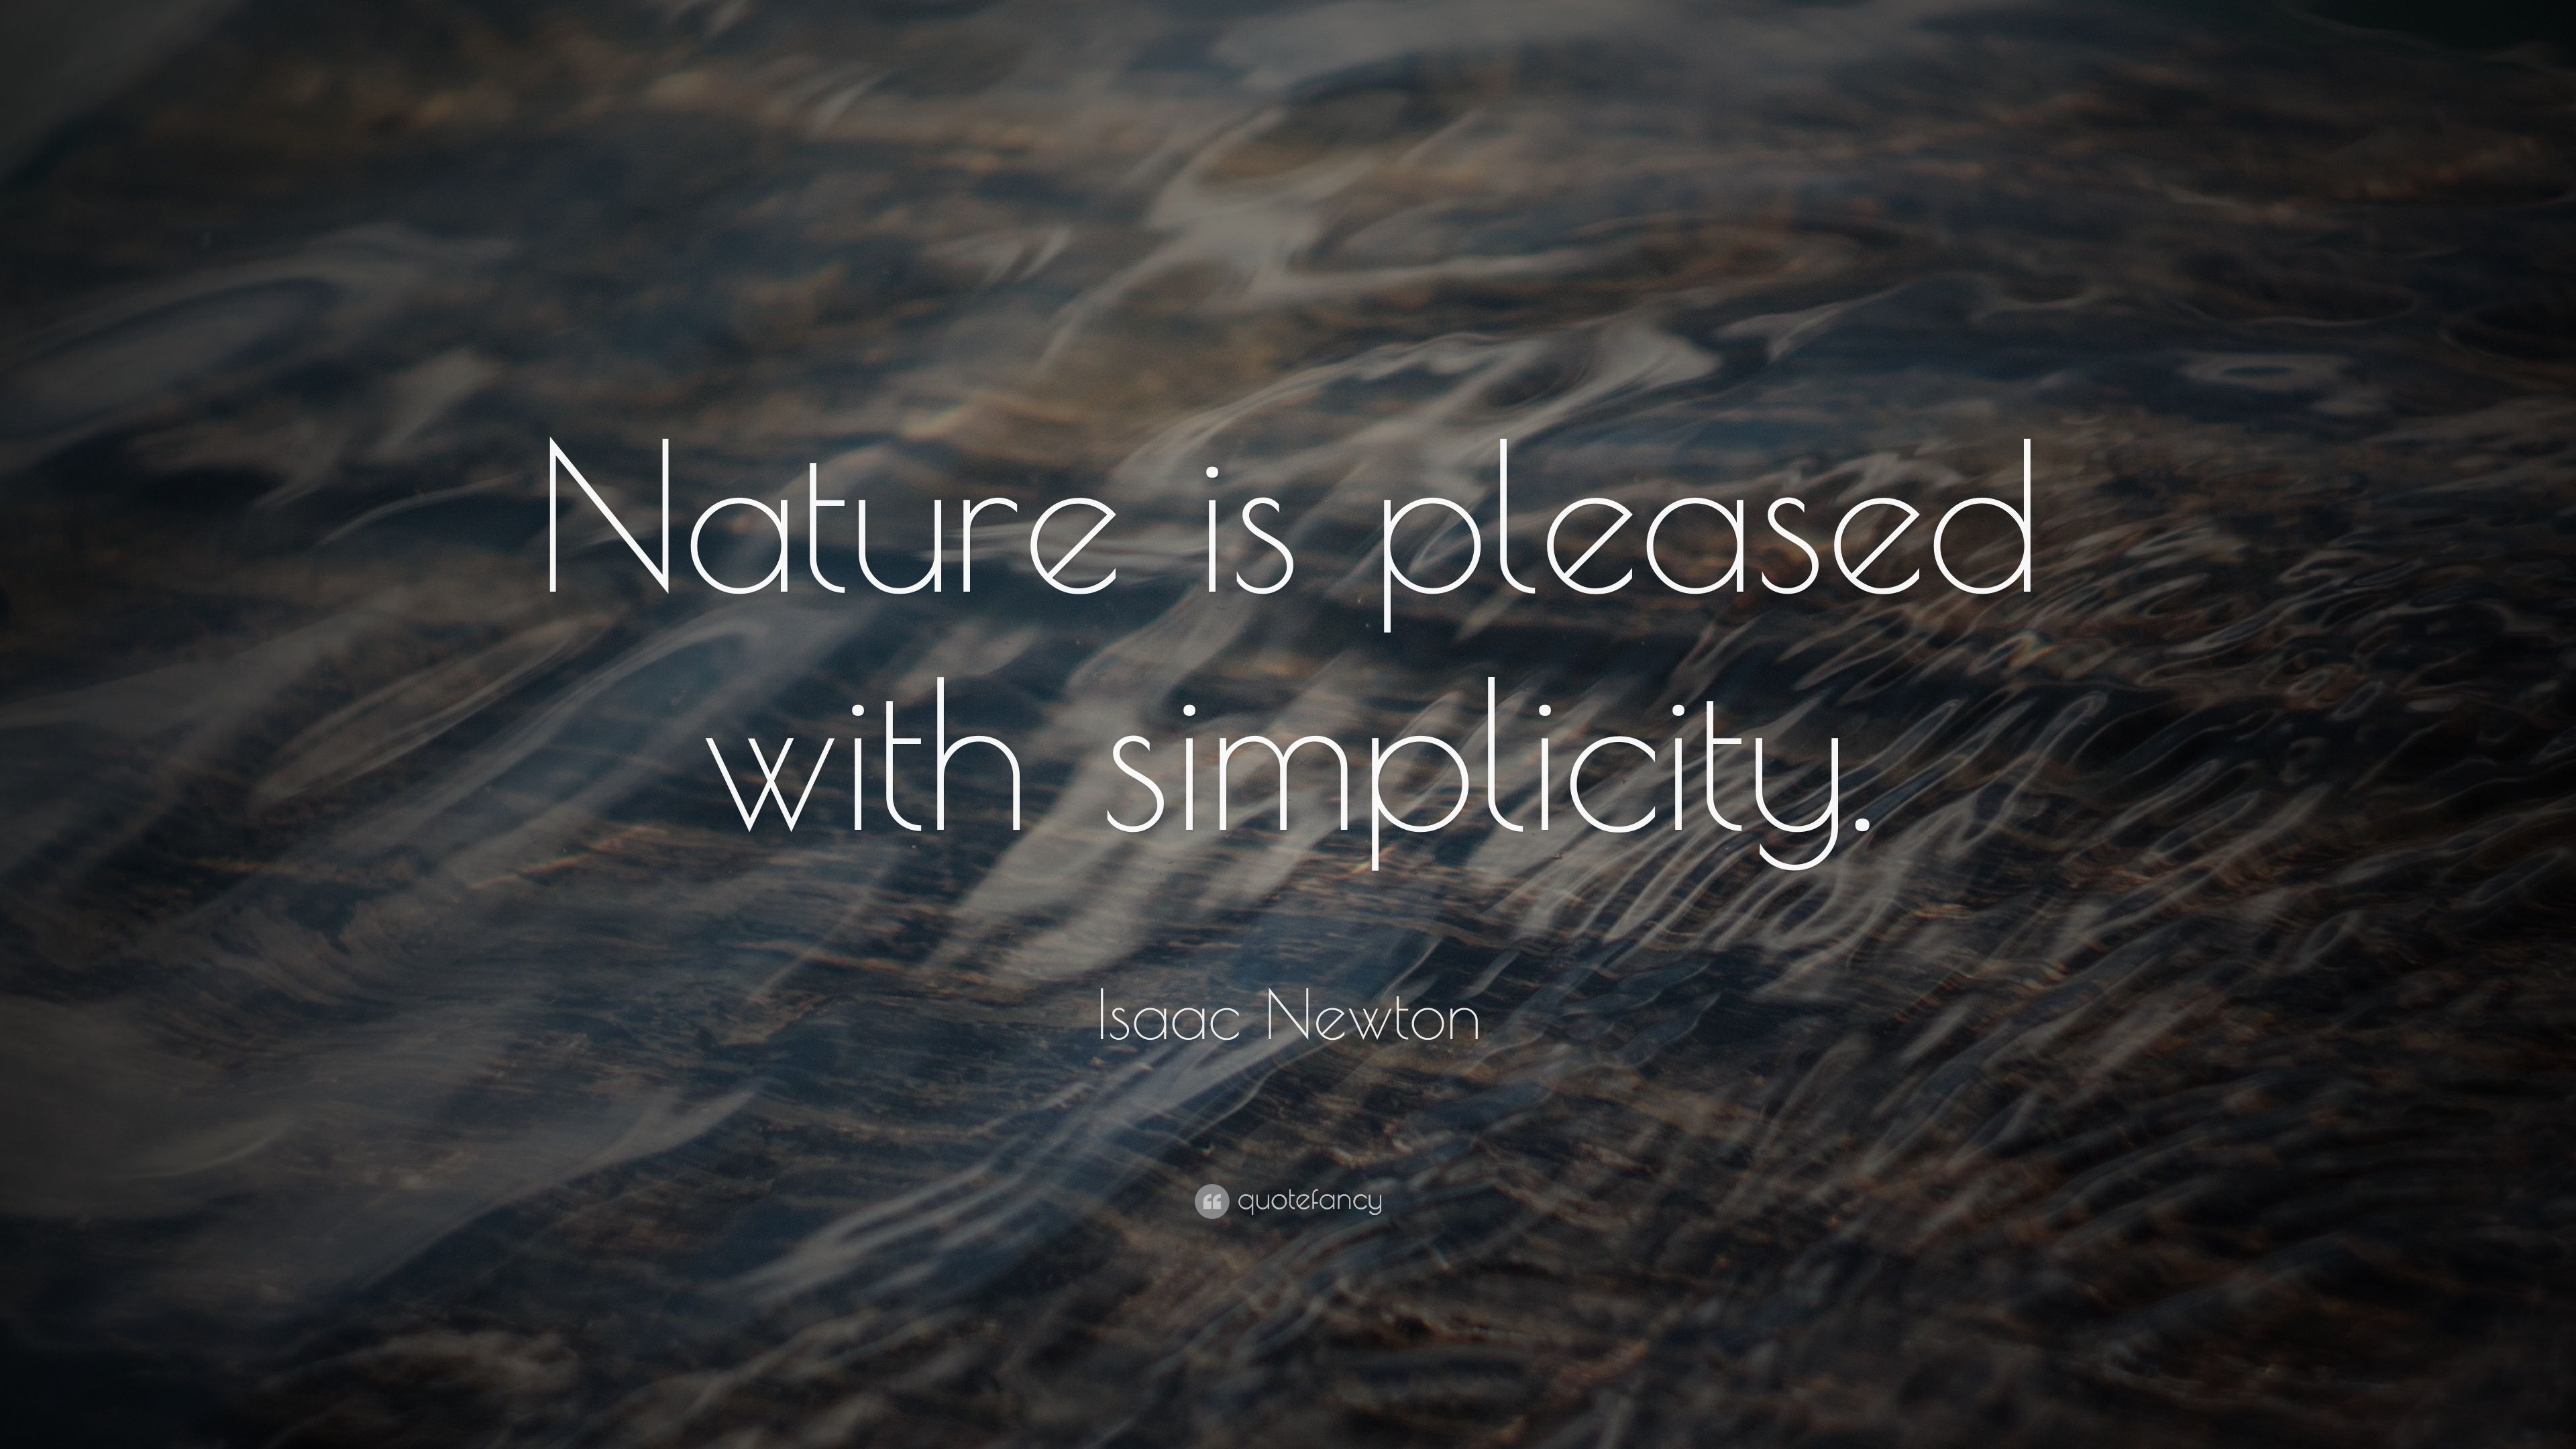 Isaac Newton Quote: “Nature is pleased with simplicity.”. Nature quotes, Inspirational quotes wallpaper, Isaac newton quotes